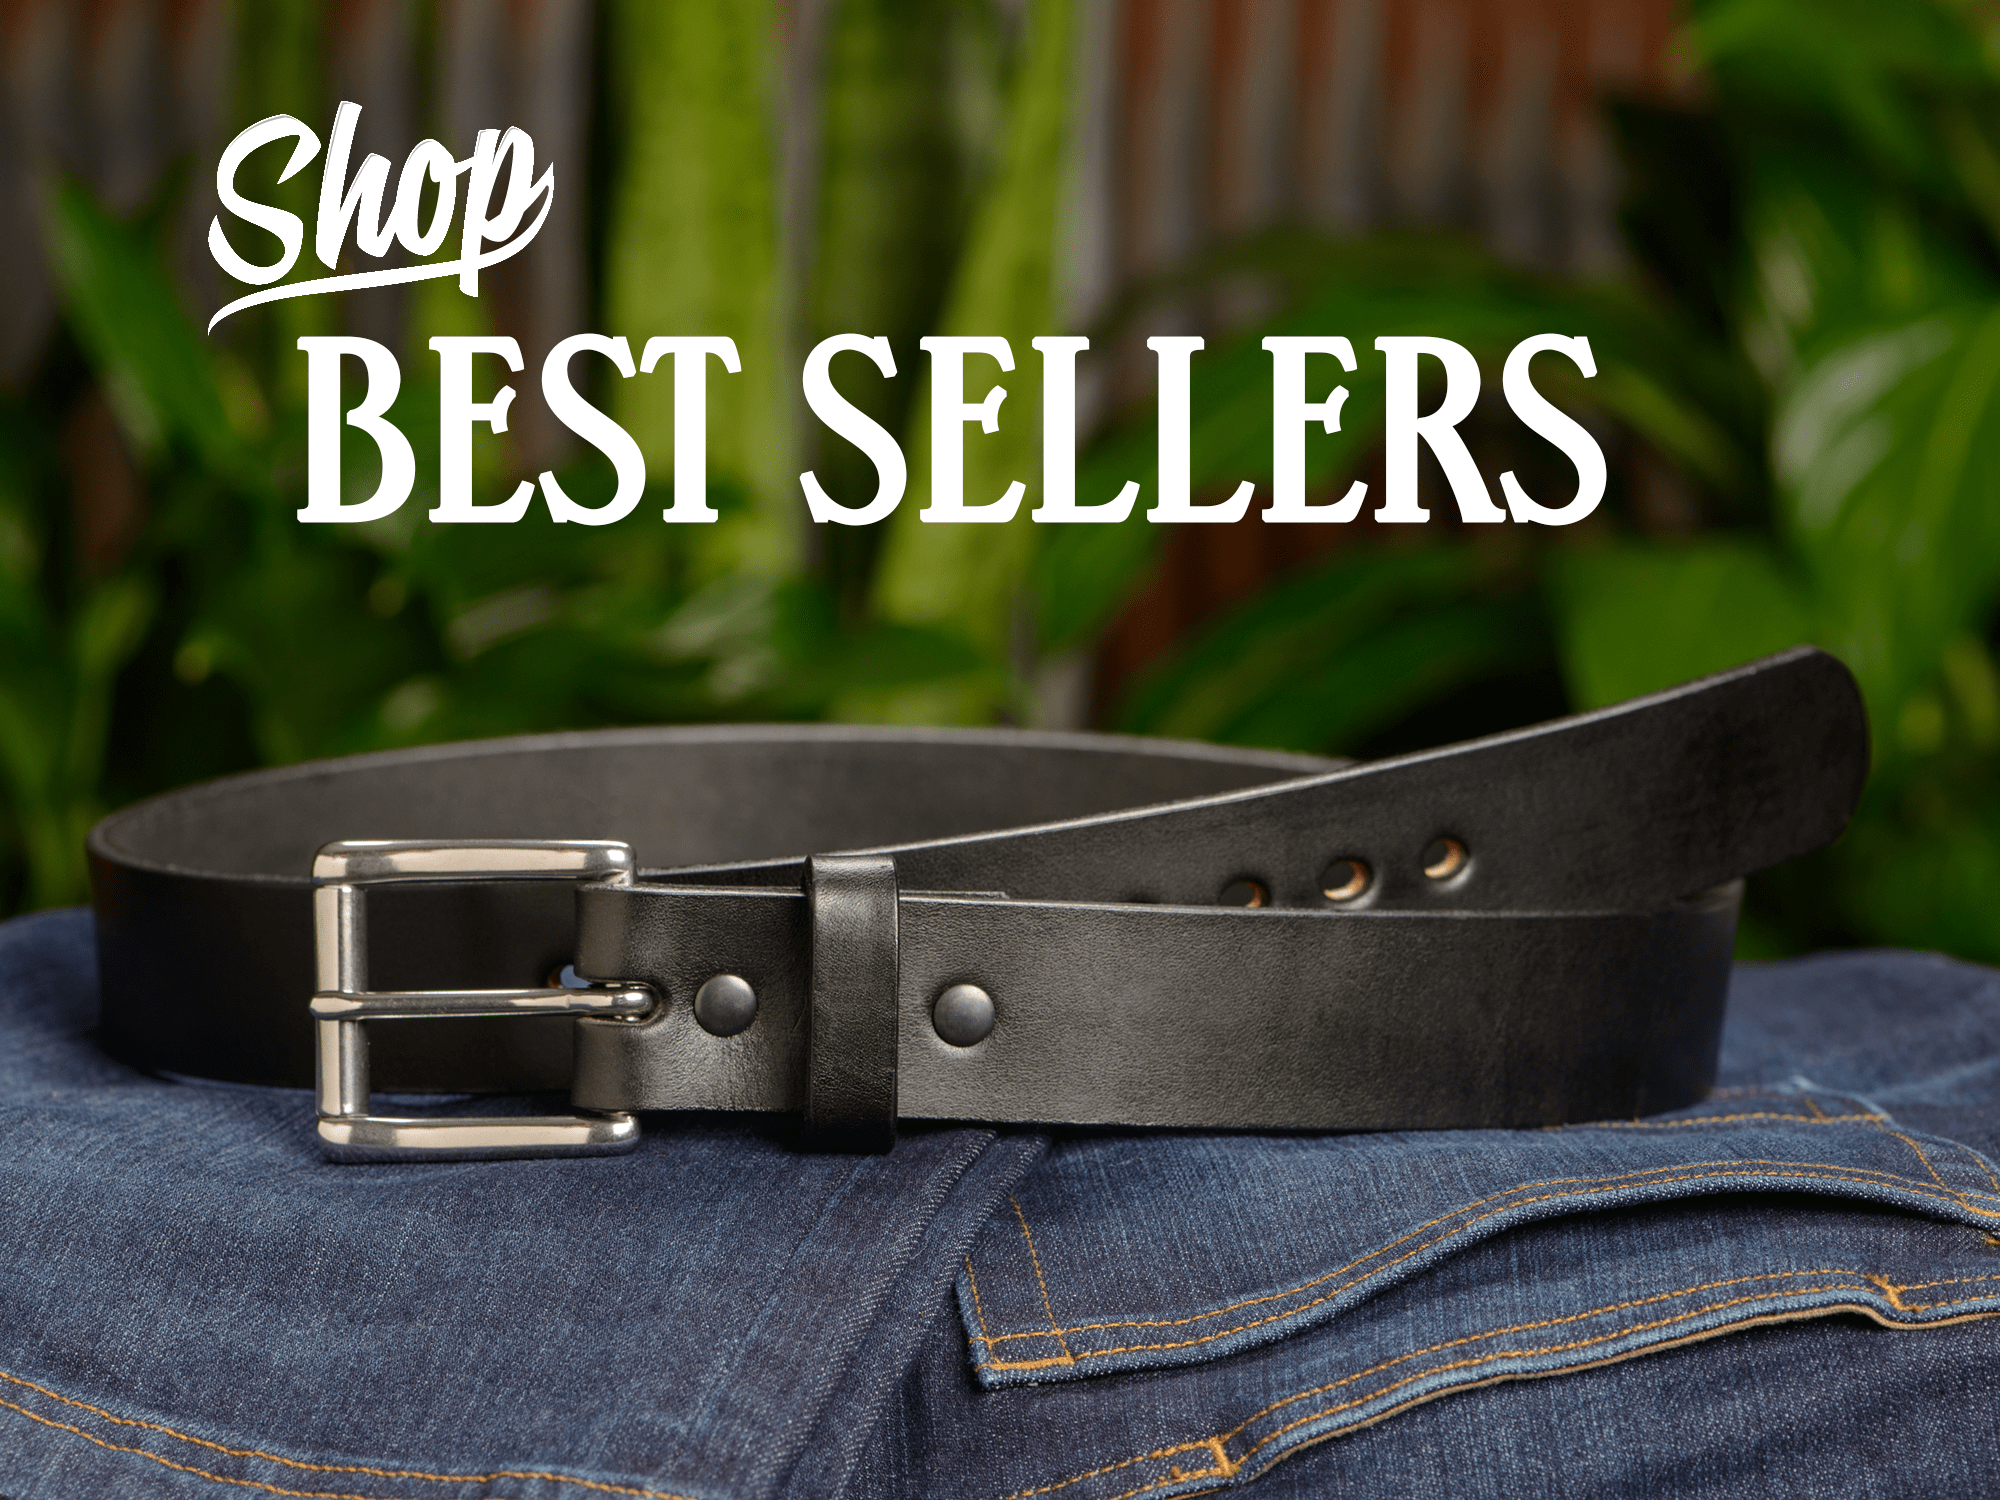 Bullhide Belts Mens Leather Belt for Work, Casual, Dress 1.50 Wide at   Men’s Clothing store